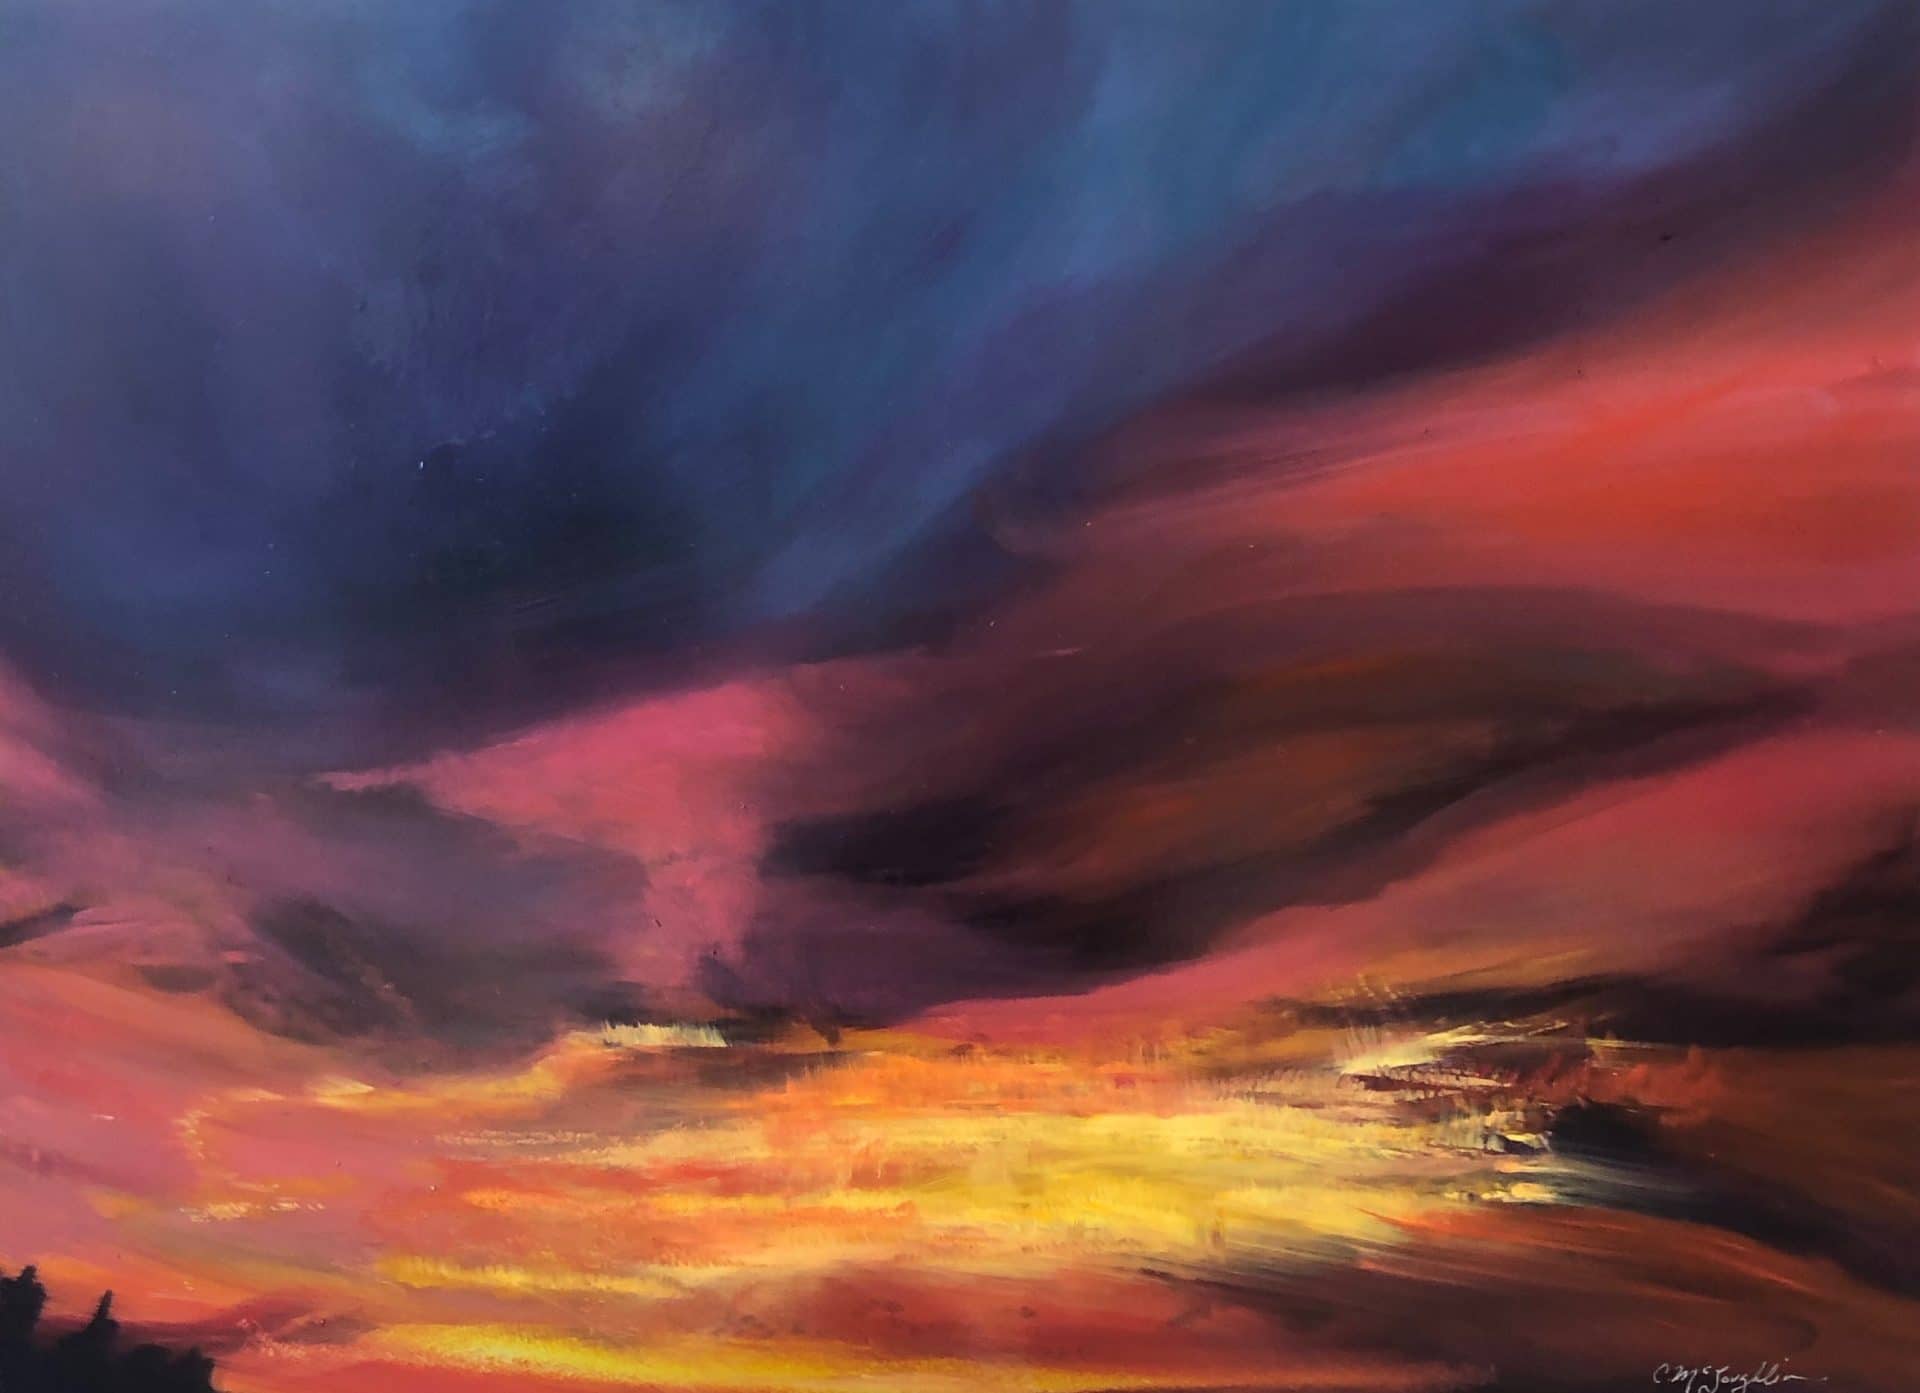 Oil on metal, painting by Cynthia McLoughlin of a rich sunset with purple, pink, orange and yellow sky.